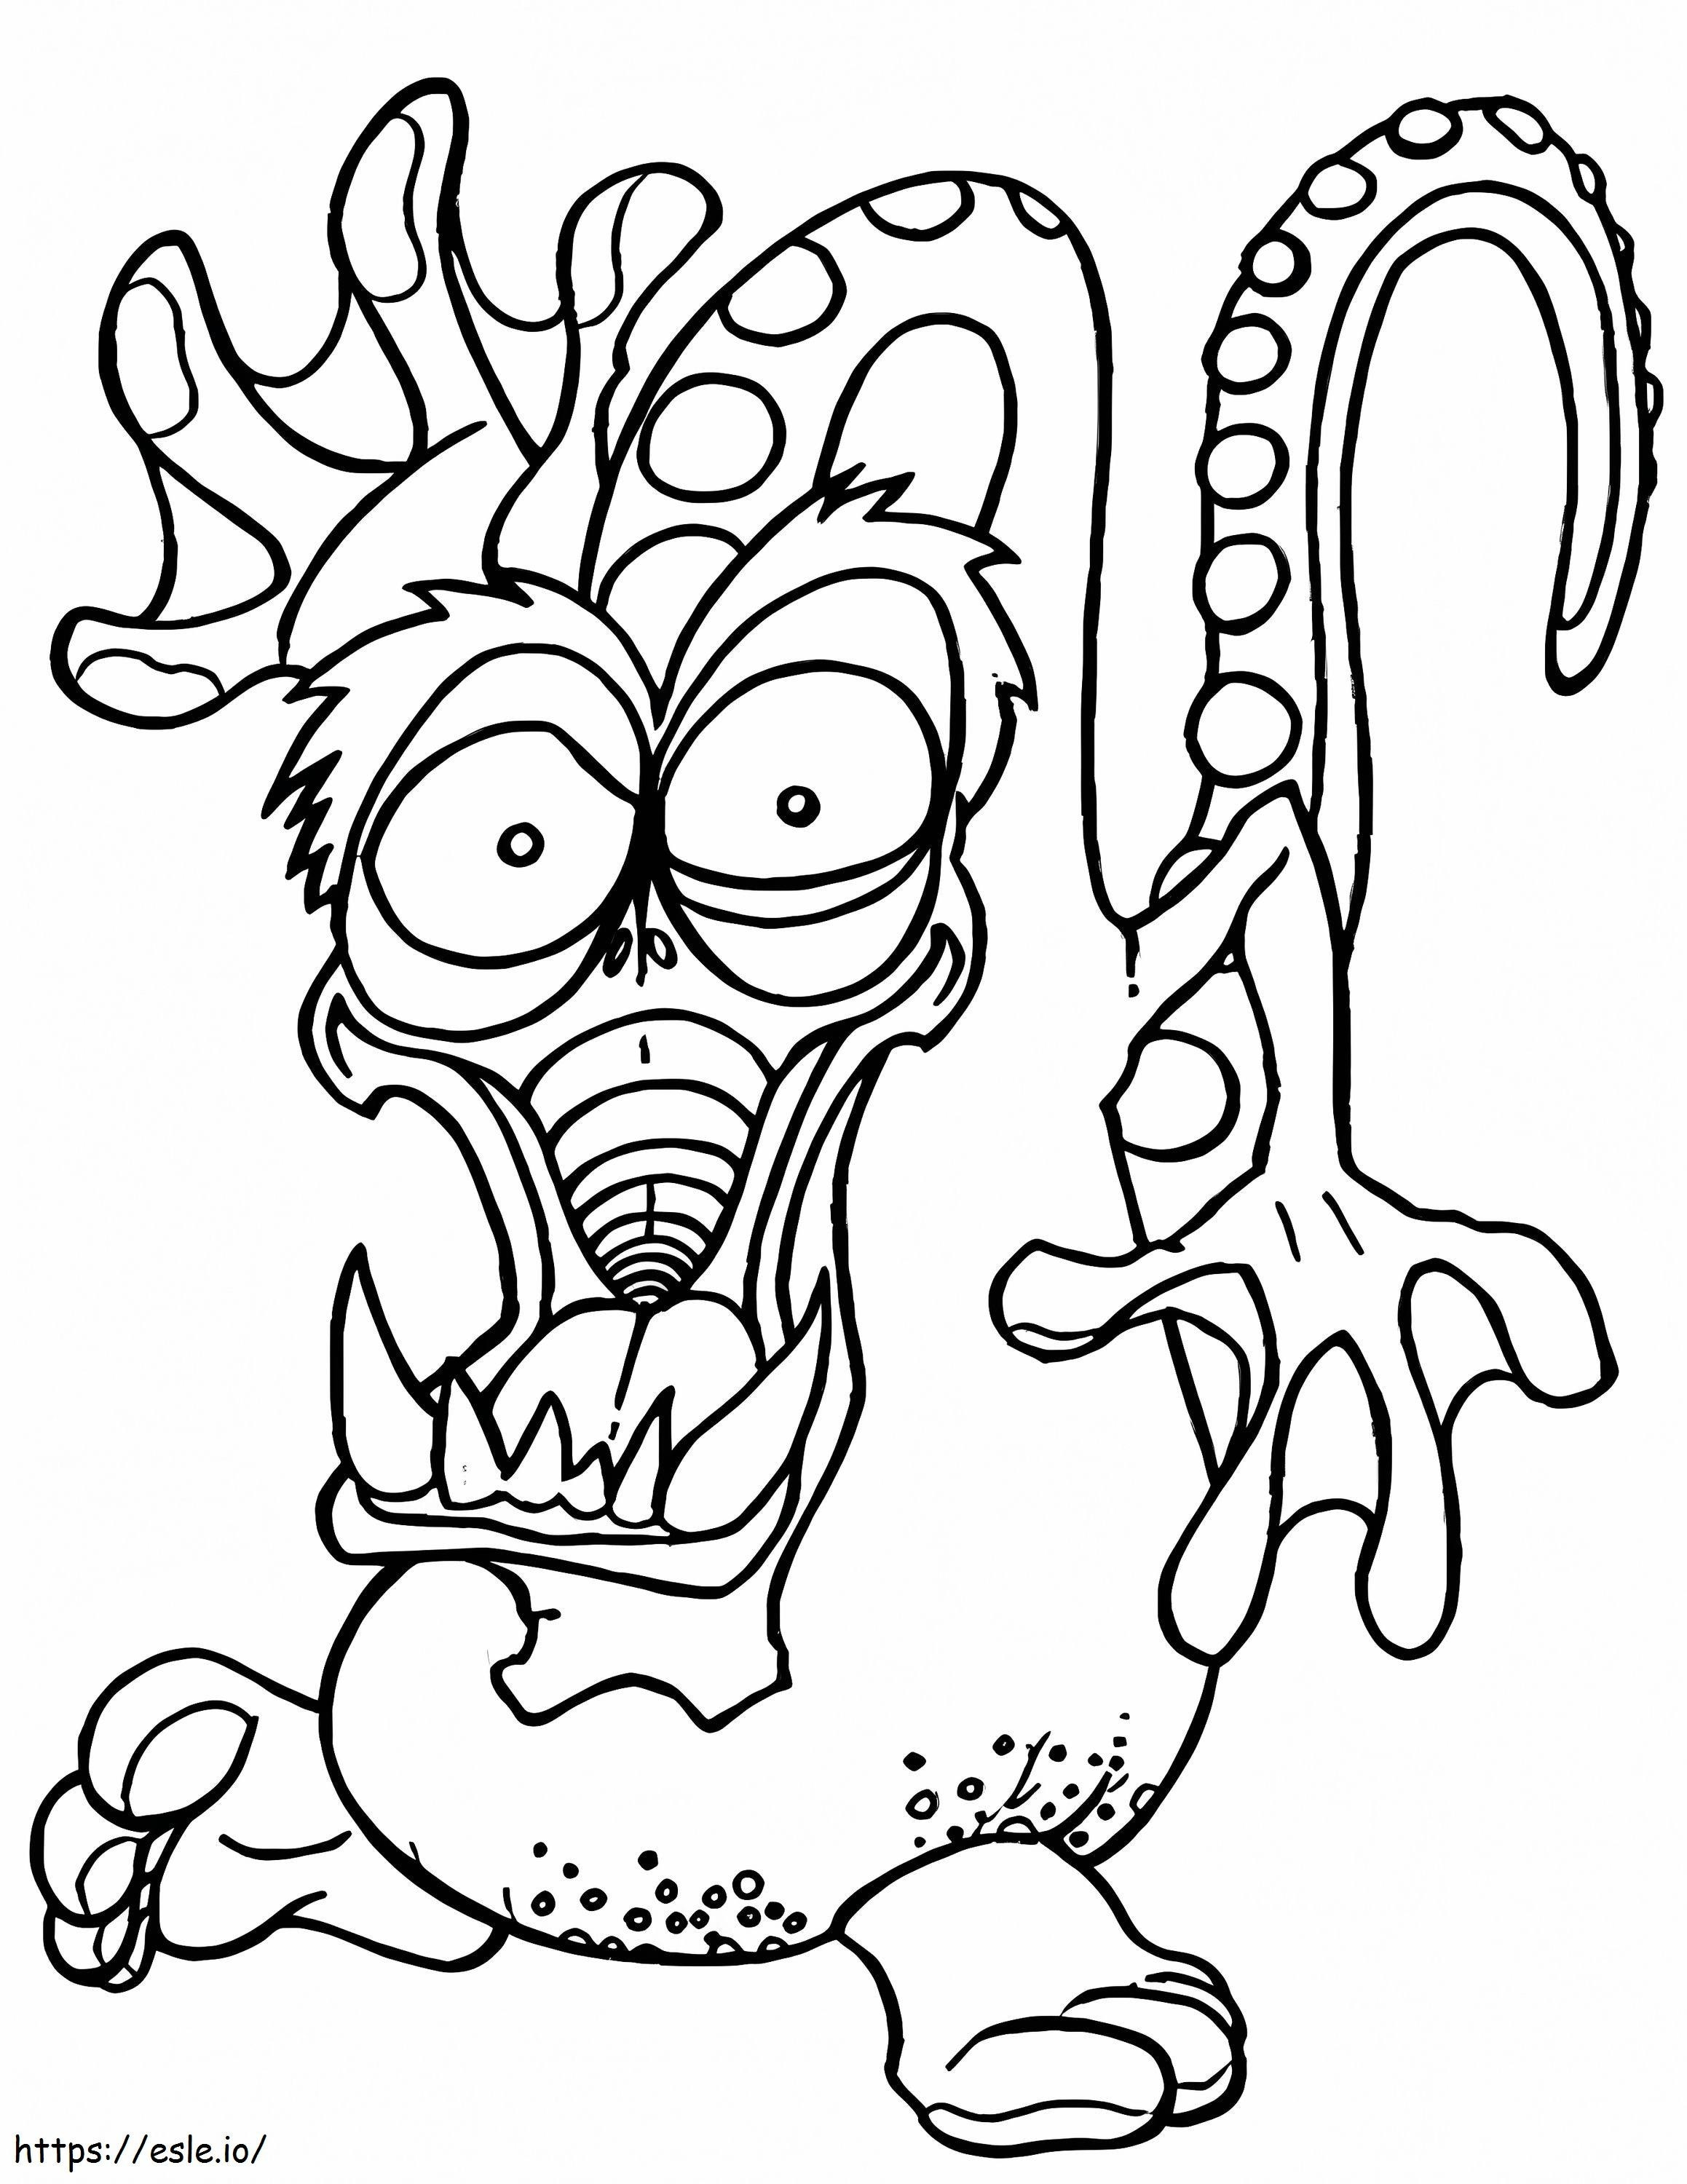 Awesome Monster coloring page